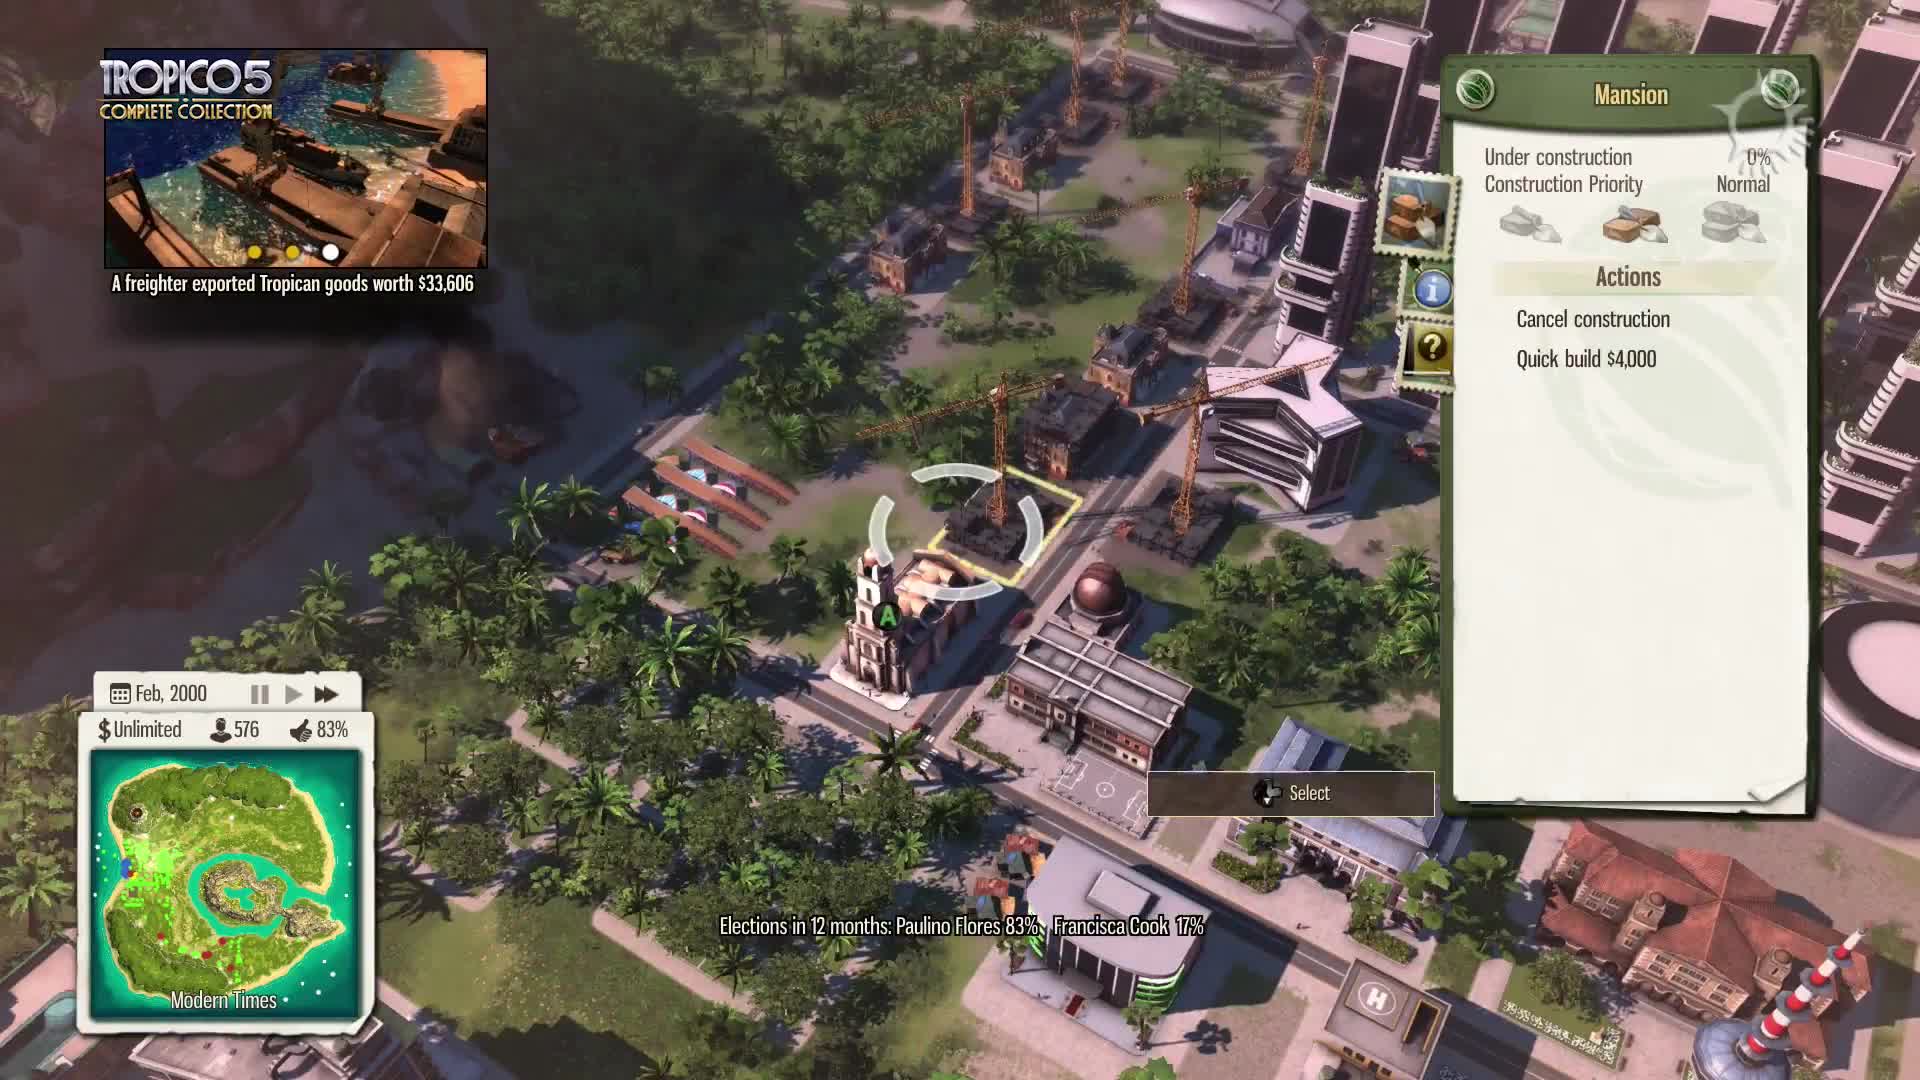 Tropico 5 Complete Collection - Xbox One Trailer 